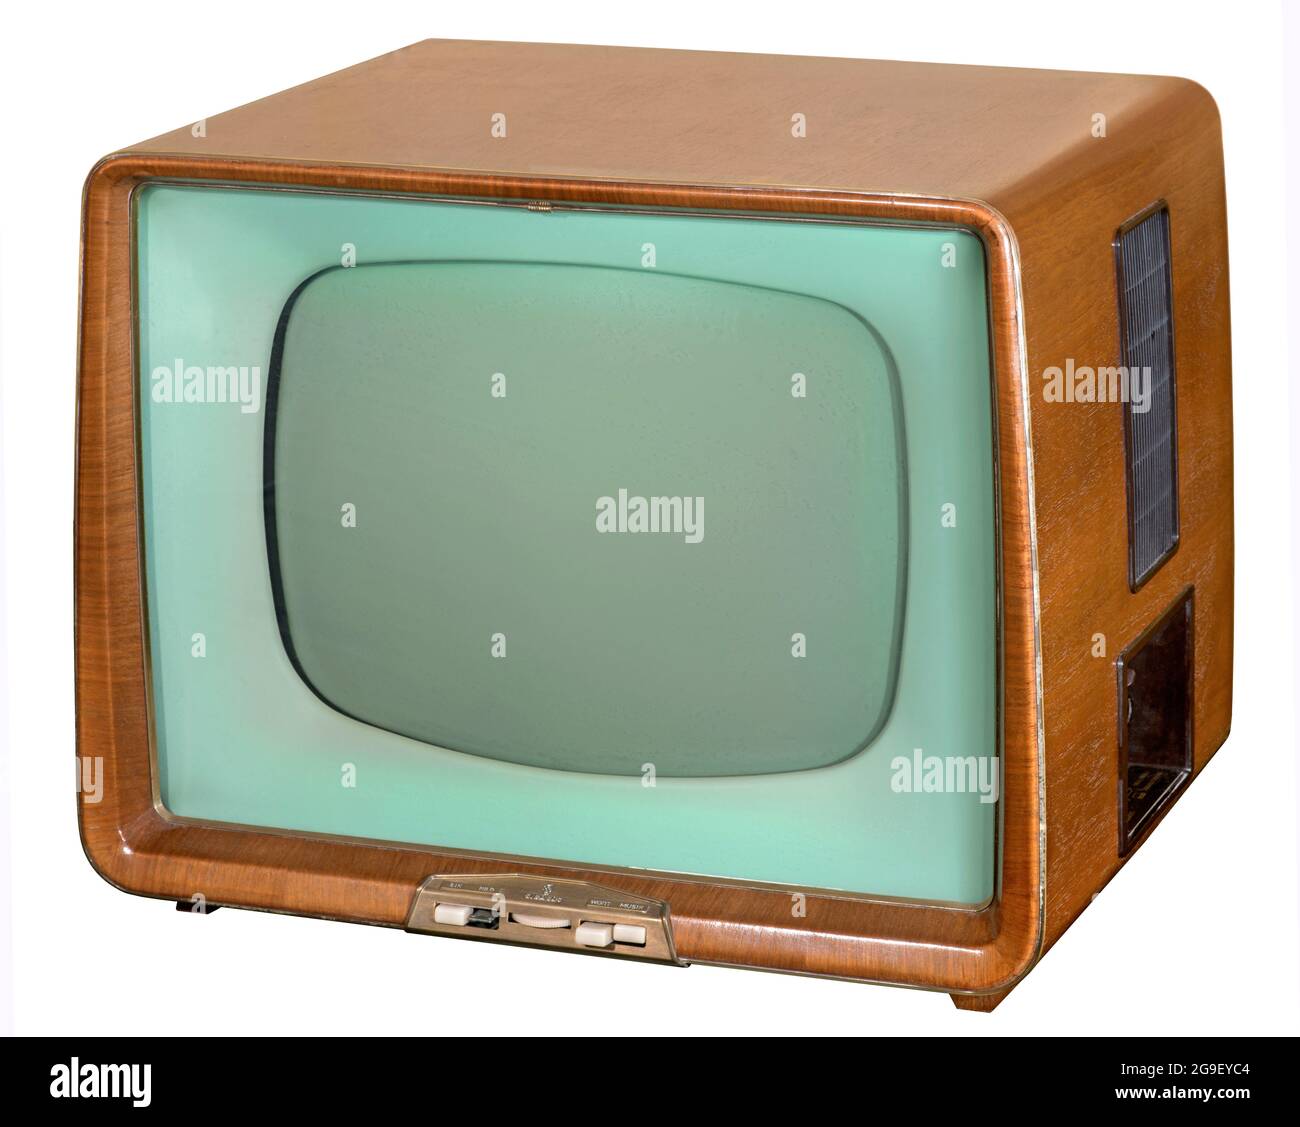 broadcast, television, television set, Siemens tabletop unit with 43 centimeter screen size, ADDITIONAL-RIGHTS-CLEARANCE-INFO-NOT-AVAILABLE Stock Photo